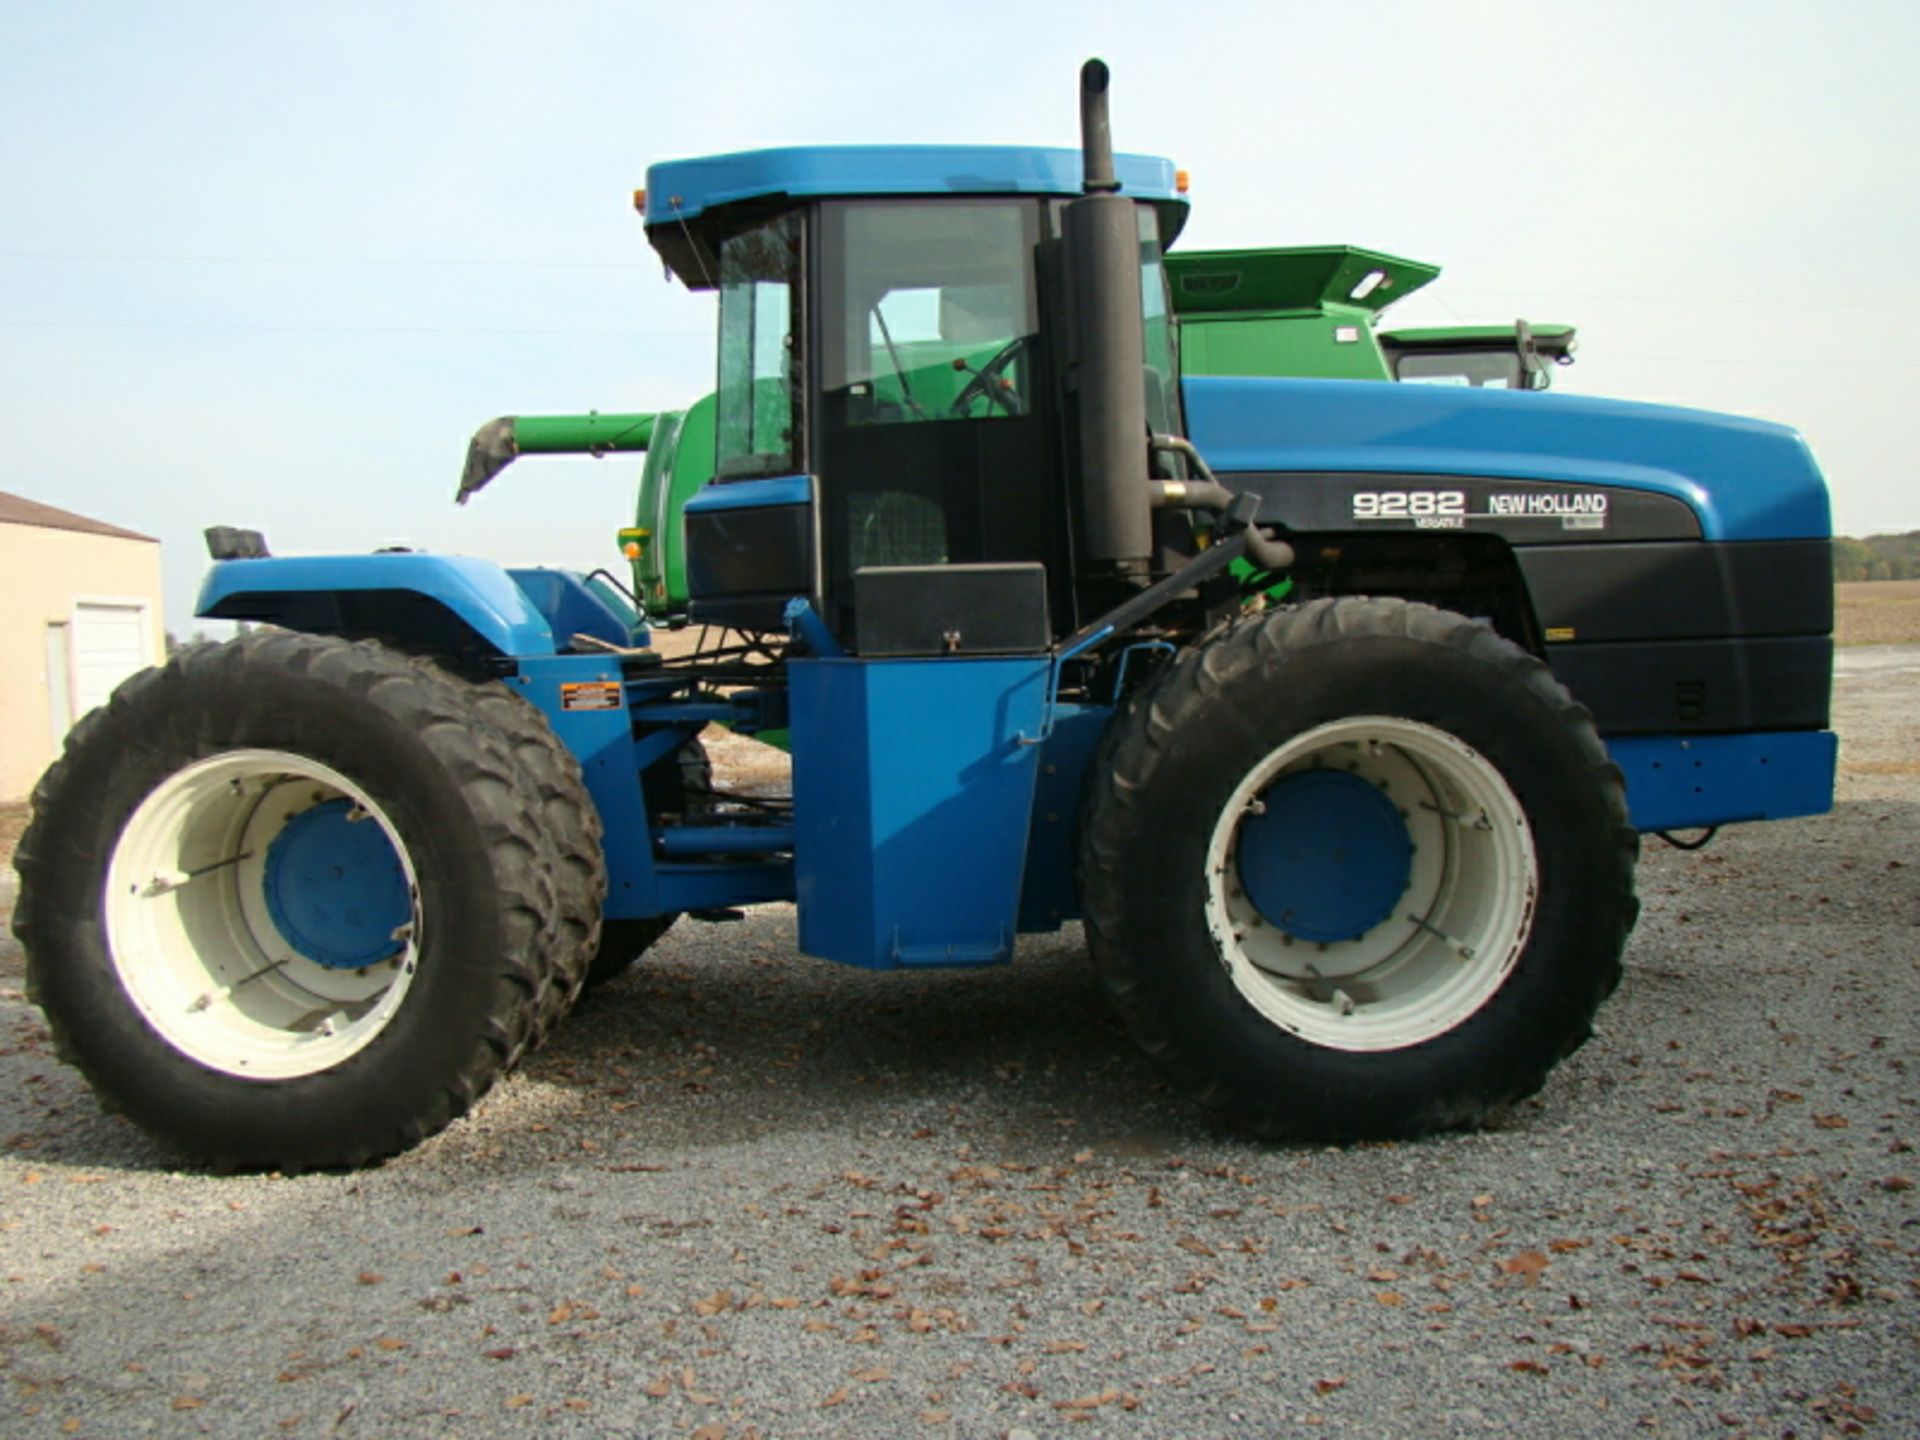 1996 New Holland 9282 tractor, 4x4, 3,515 hours, 5.9 Cummins, Good Year 18.4-38 duals 50%, - Image 7 of 26